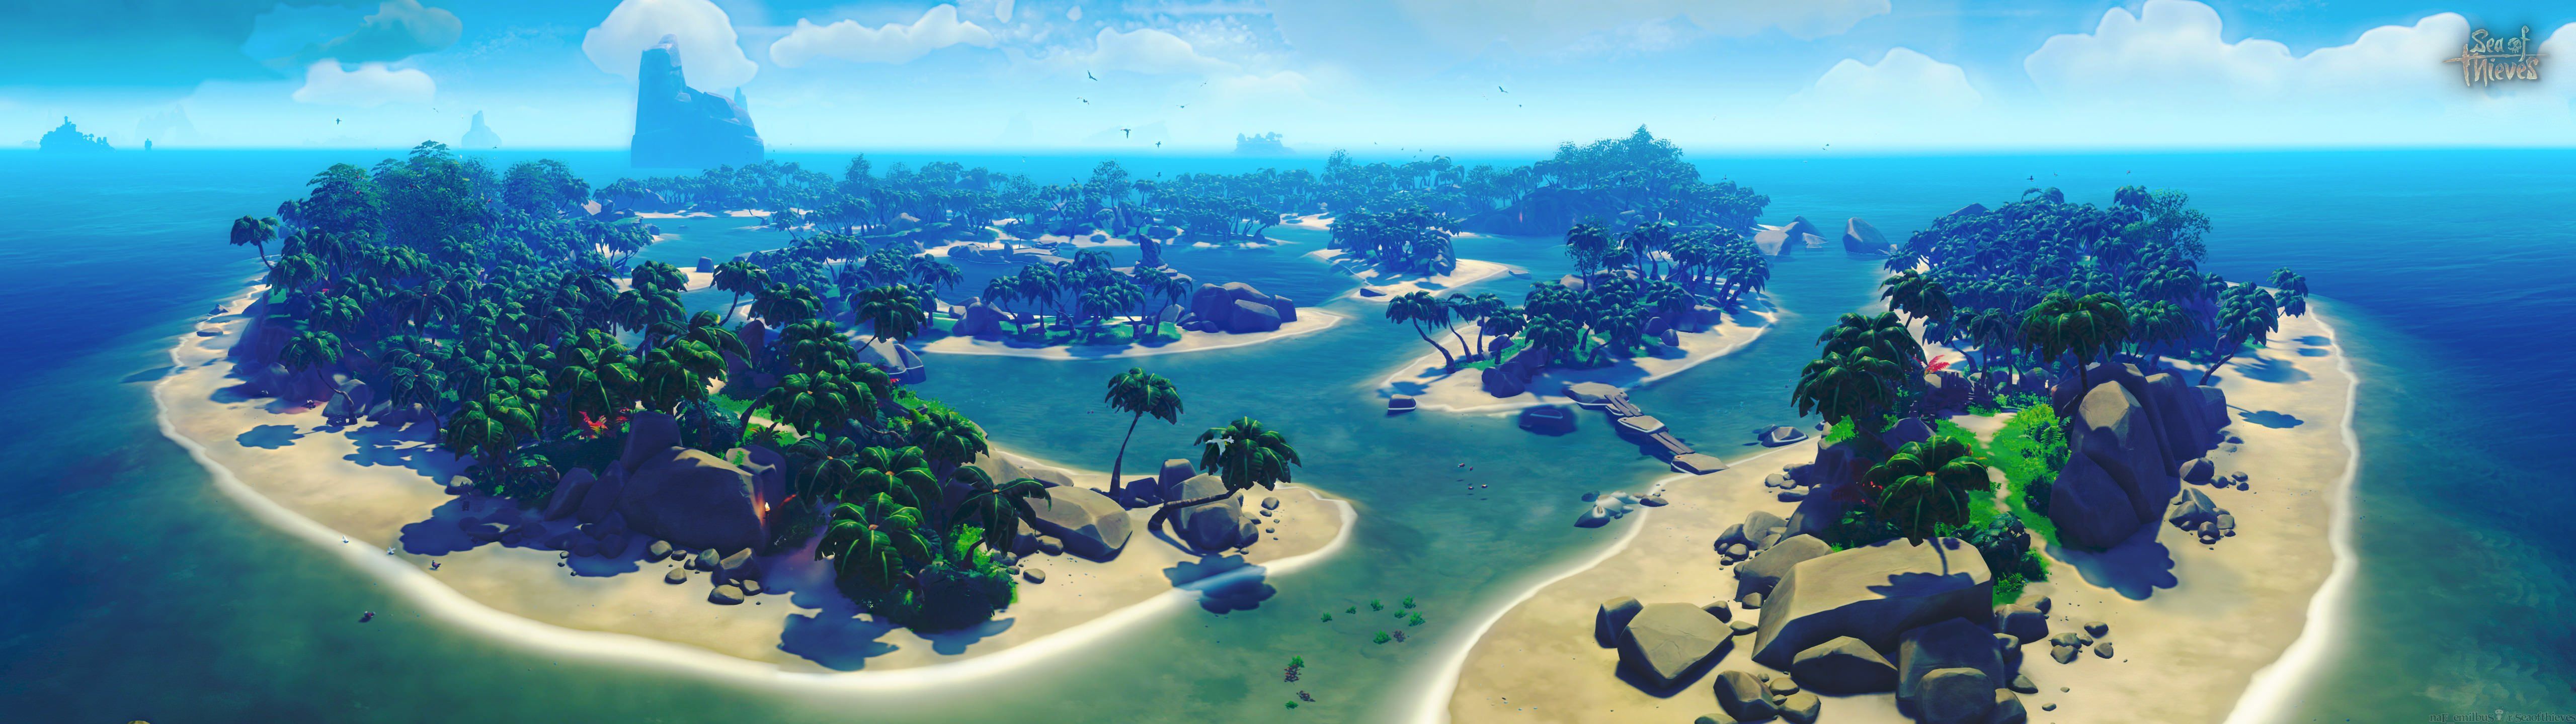 A beautiful view of the islands in Sea of Thieves - 5120x1440